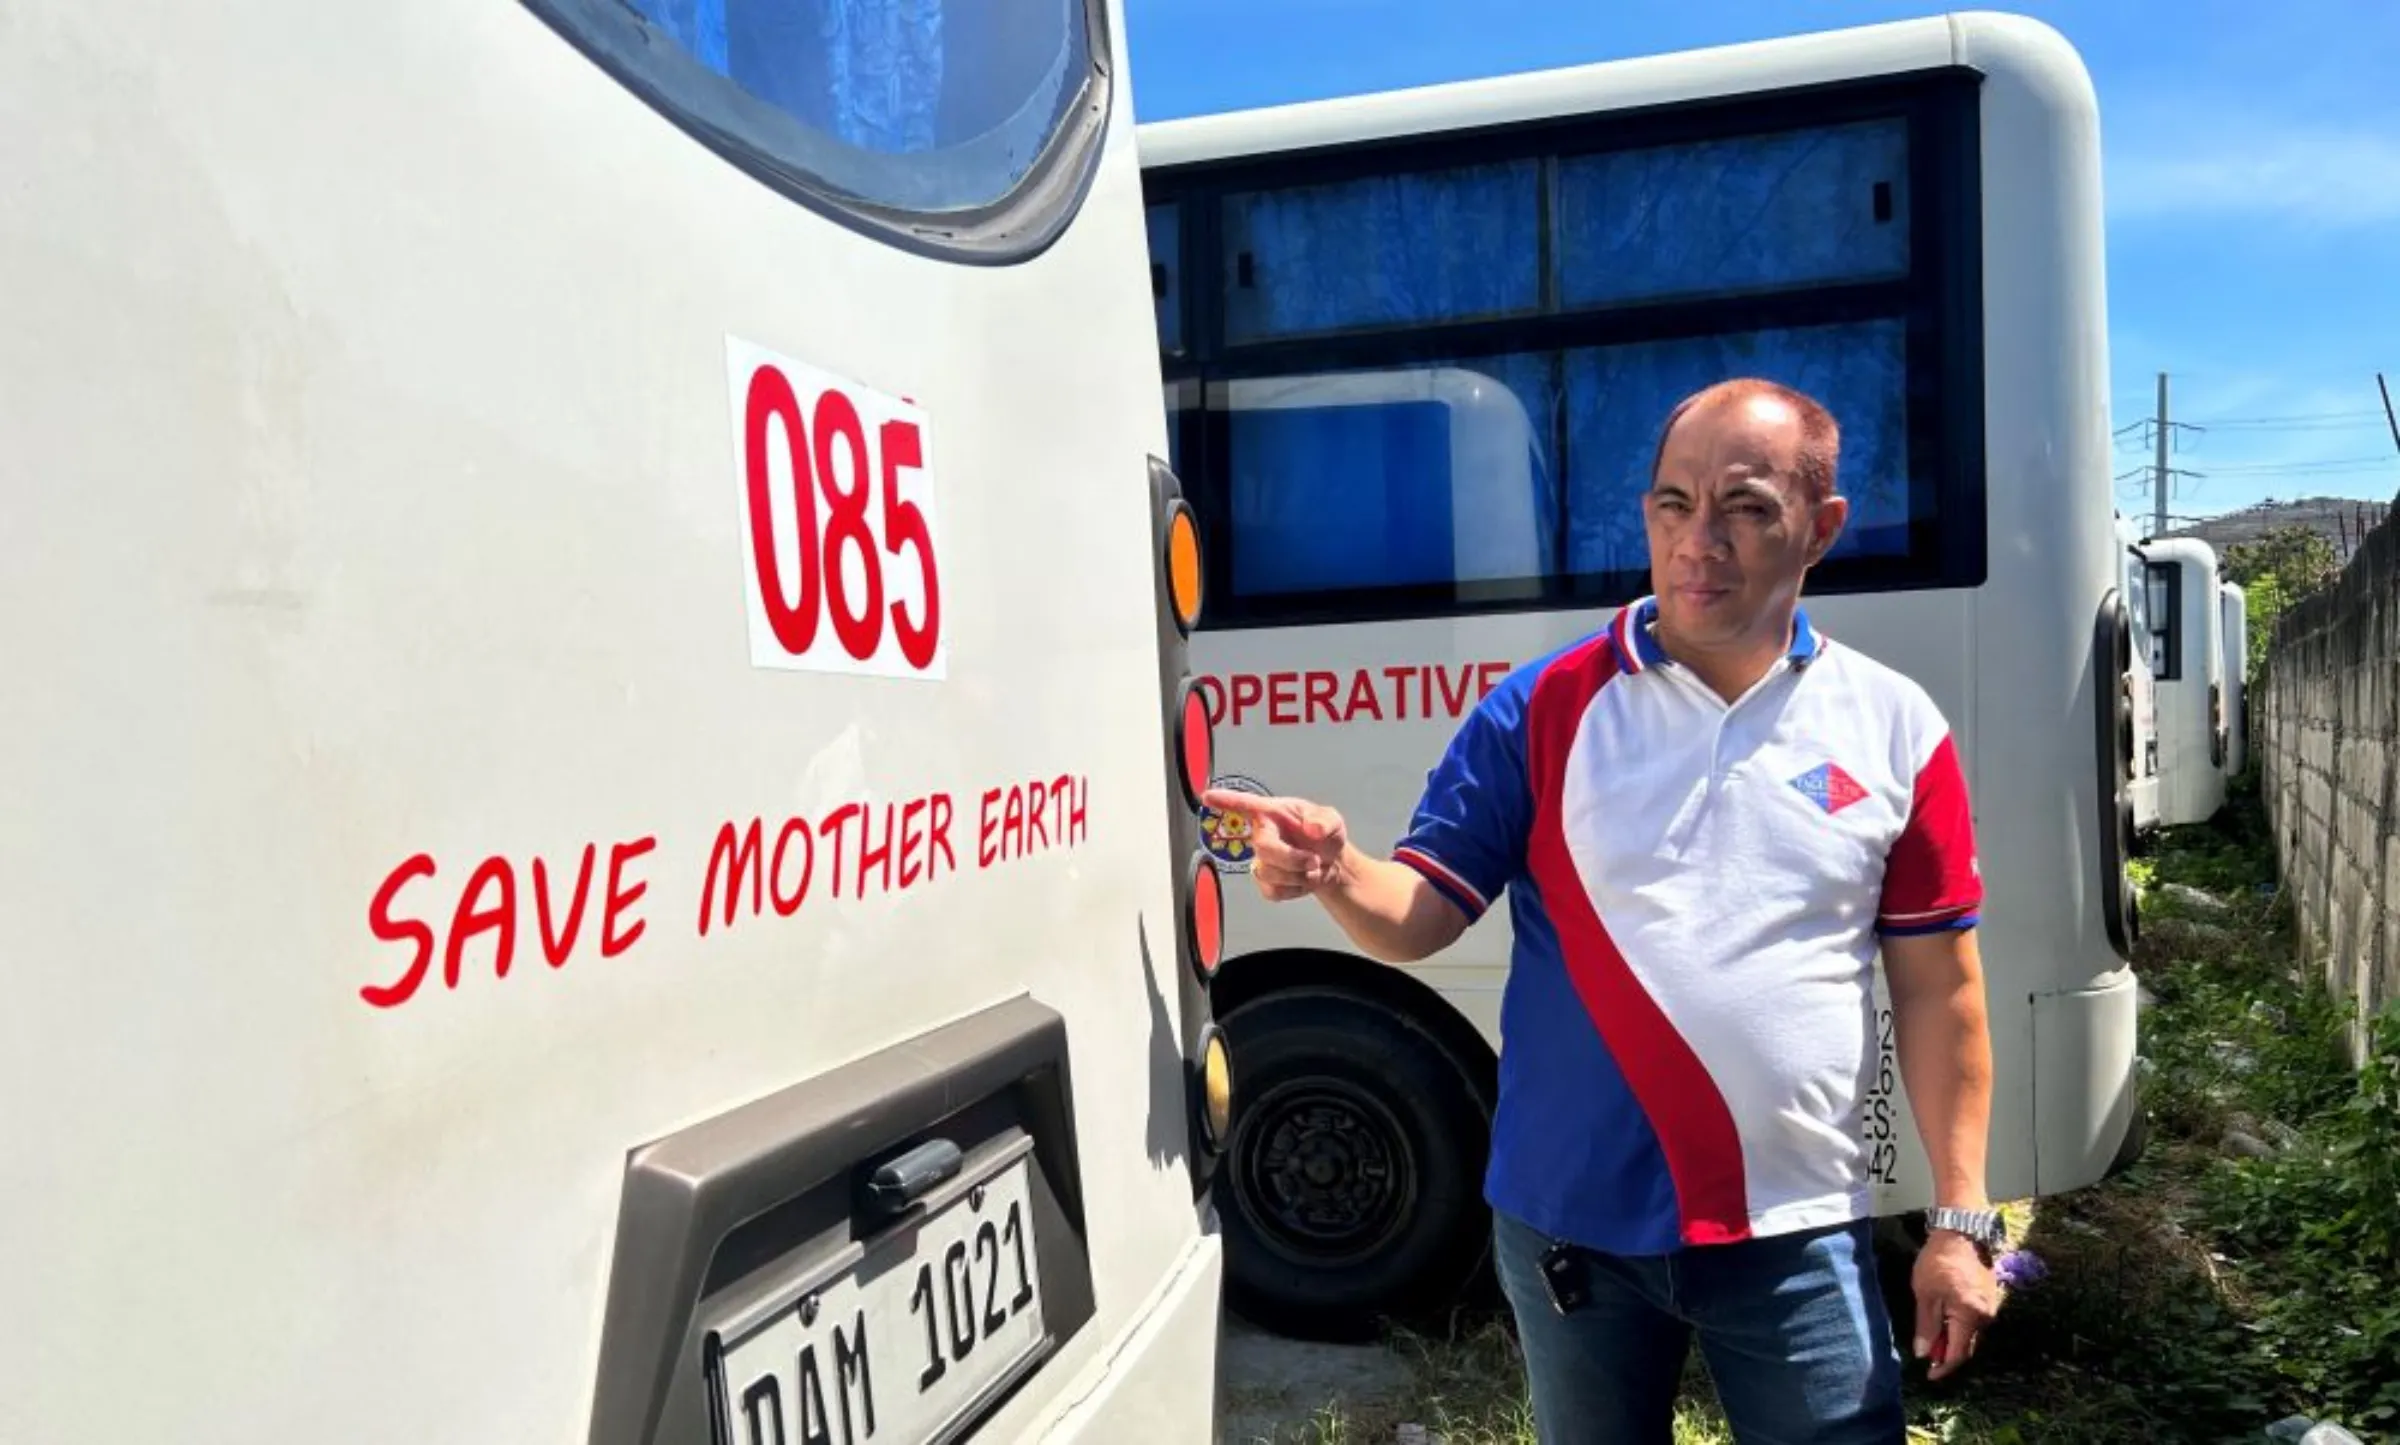 Freddie Hernandez, the head of a transport cooperative, poses with imported minibuses bought to replace traditional Jeepneys in Metro Manila, the Philippines, on February 17, 2023